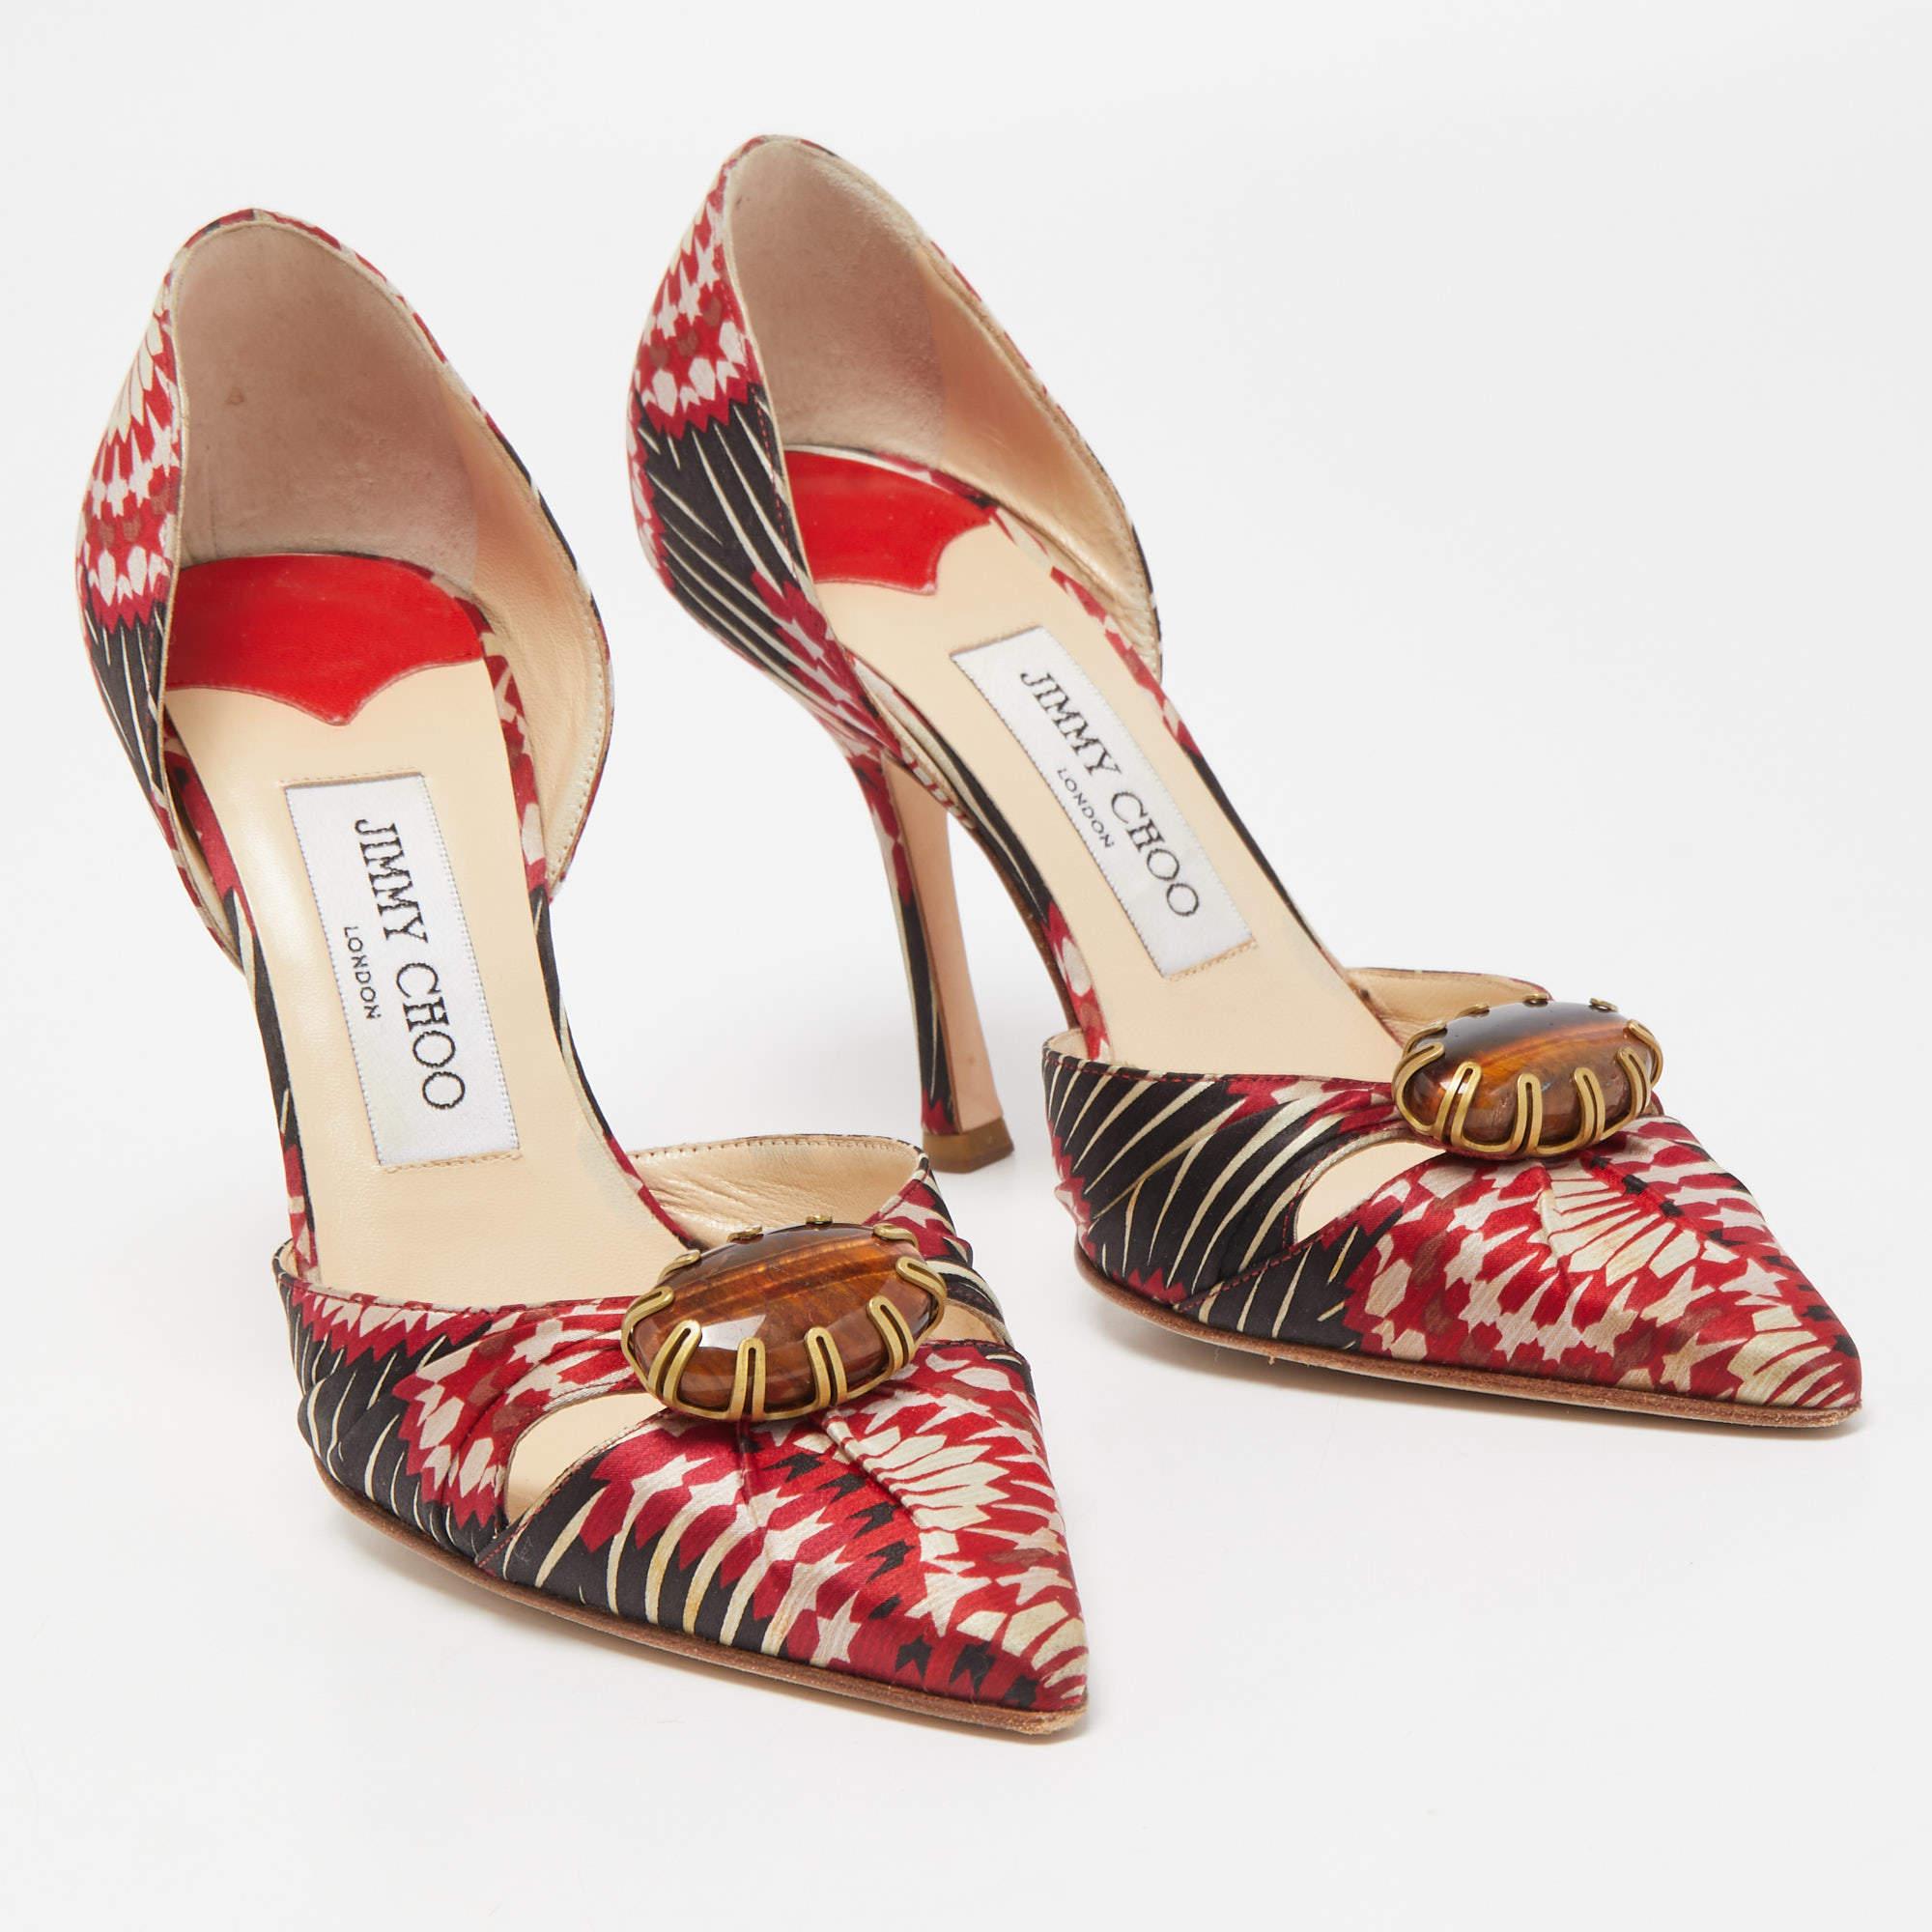 Jimmy Choo Floral Satin Ruby Cut Out D' Orsay Pointed Toe Pumps Size 35 1